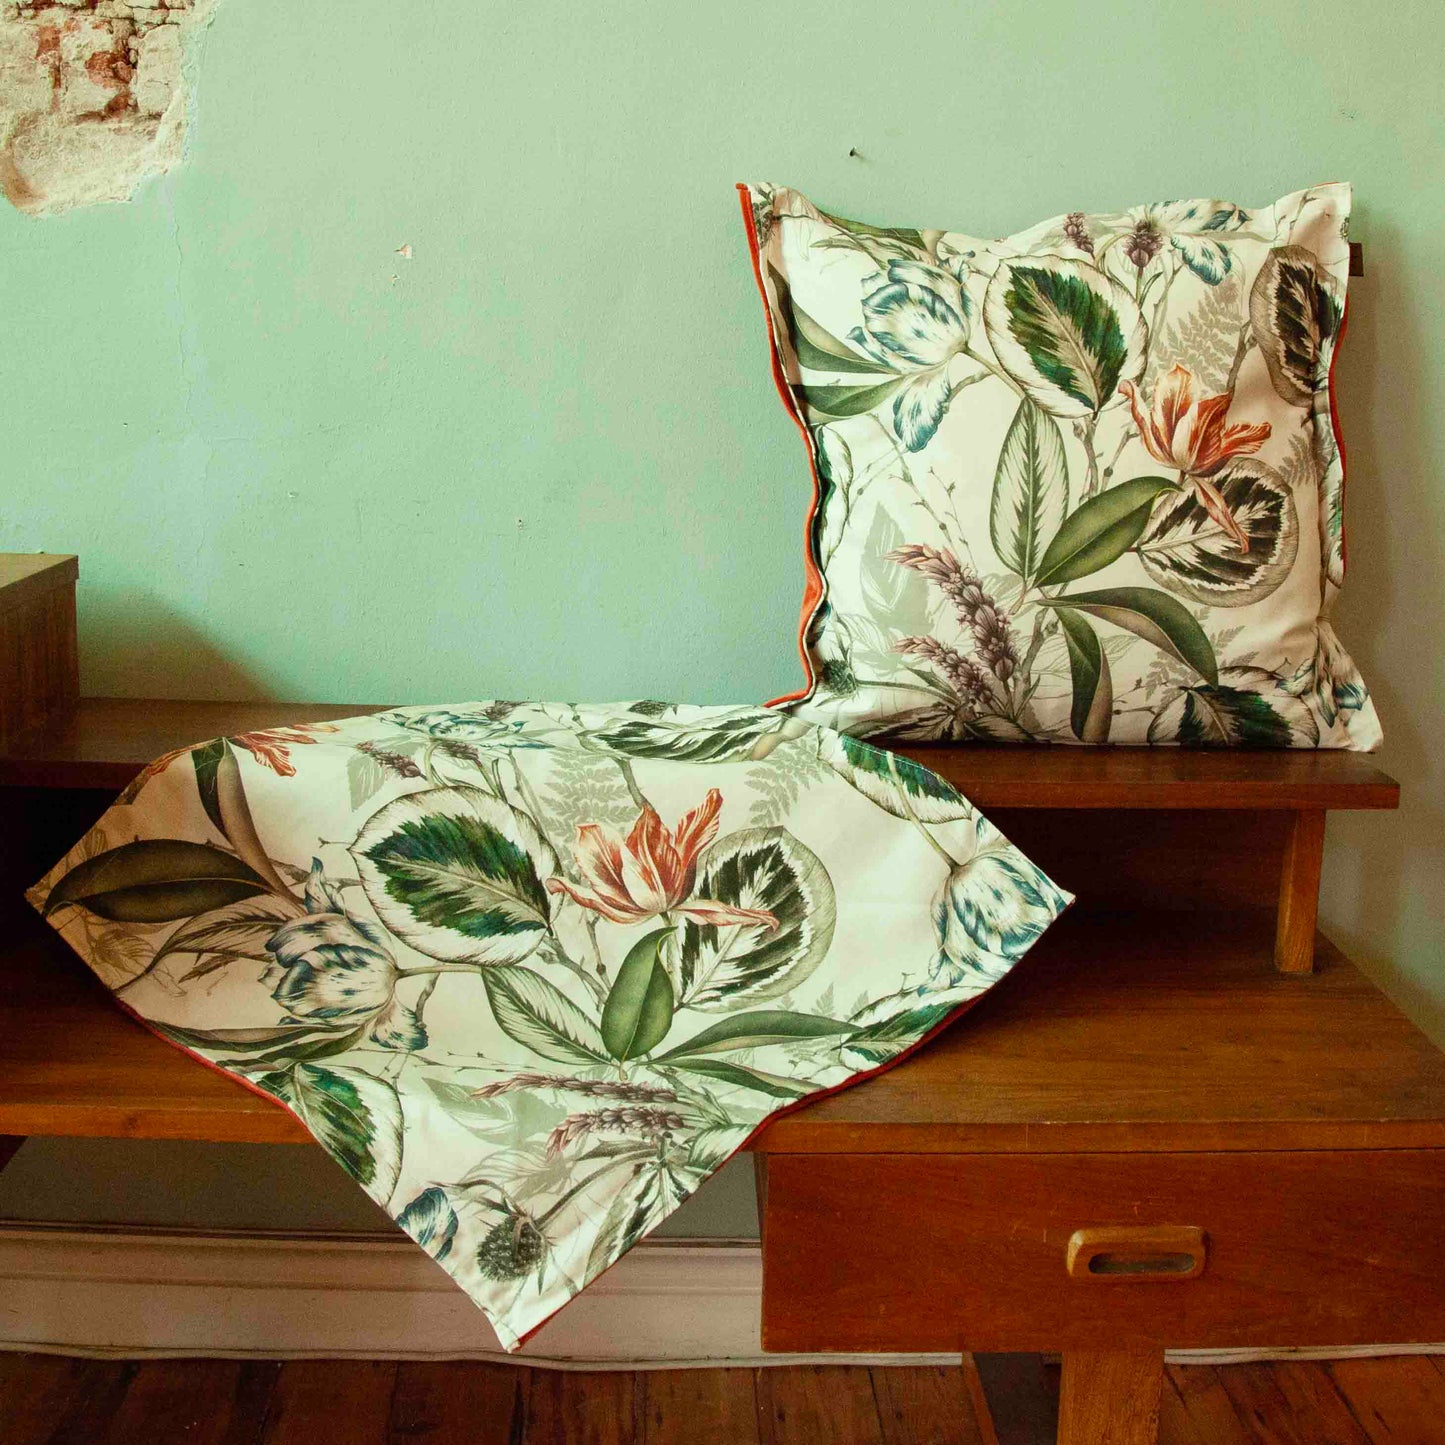 Small cushion covers